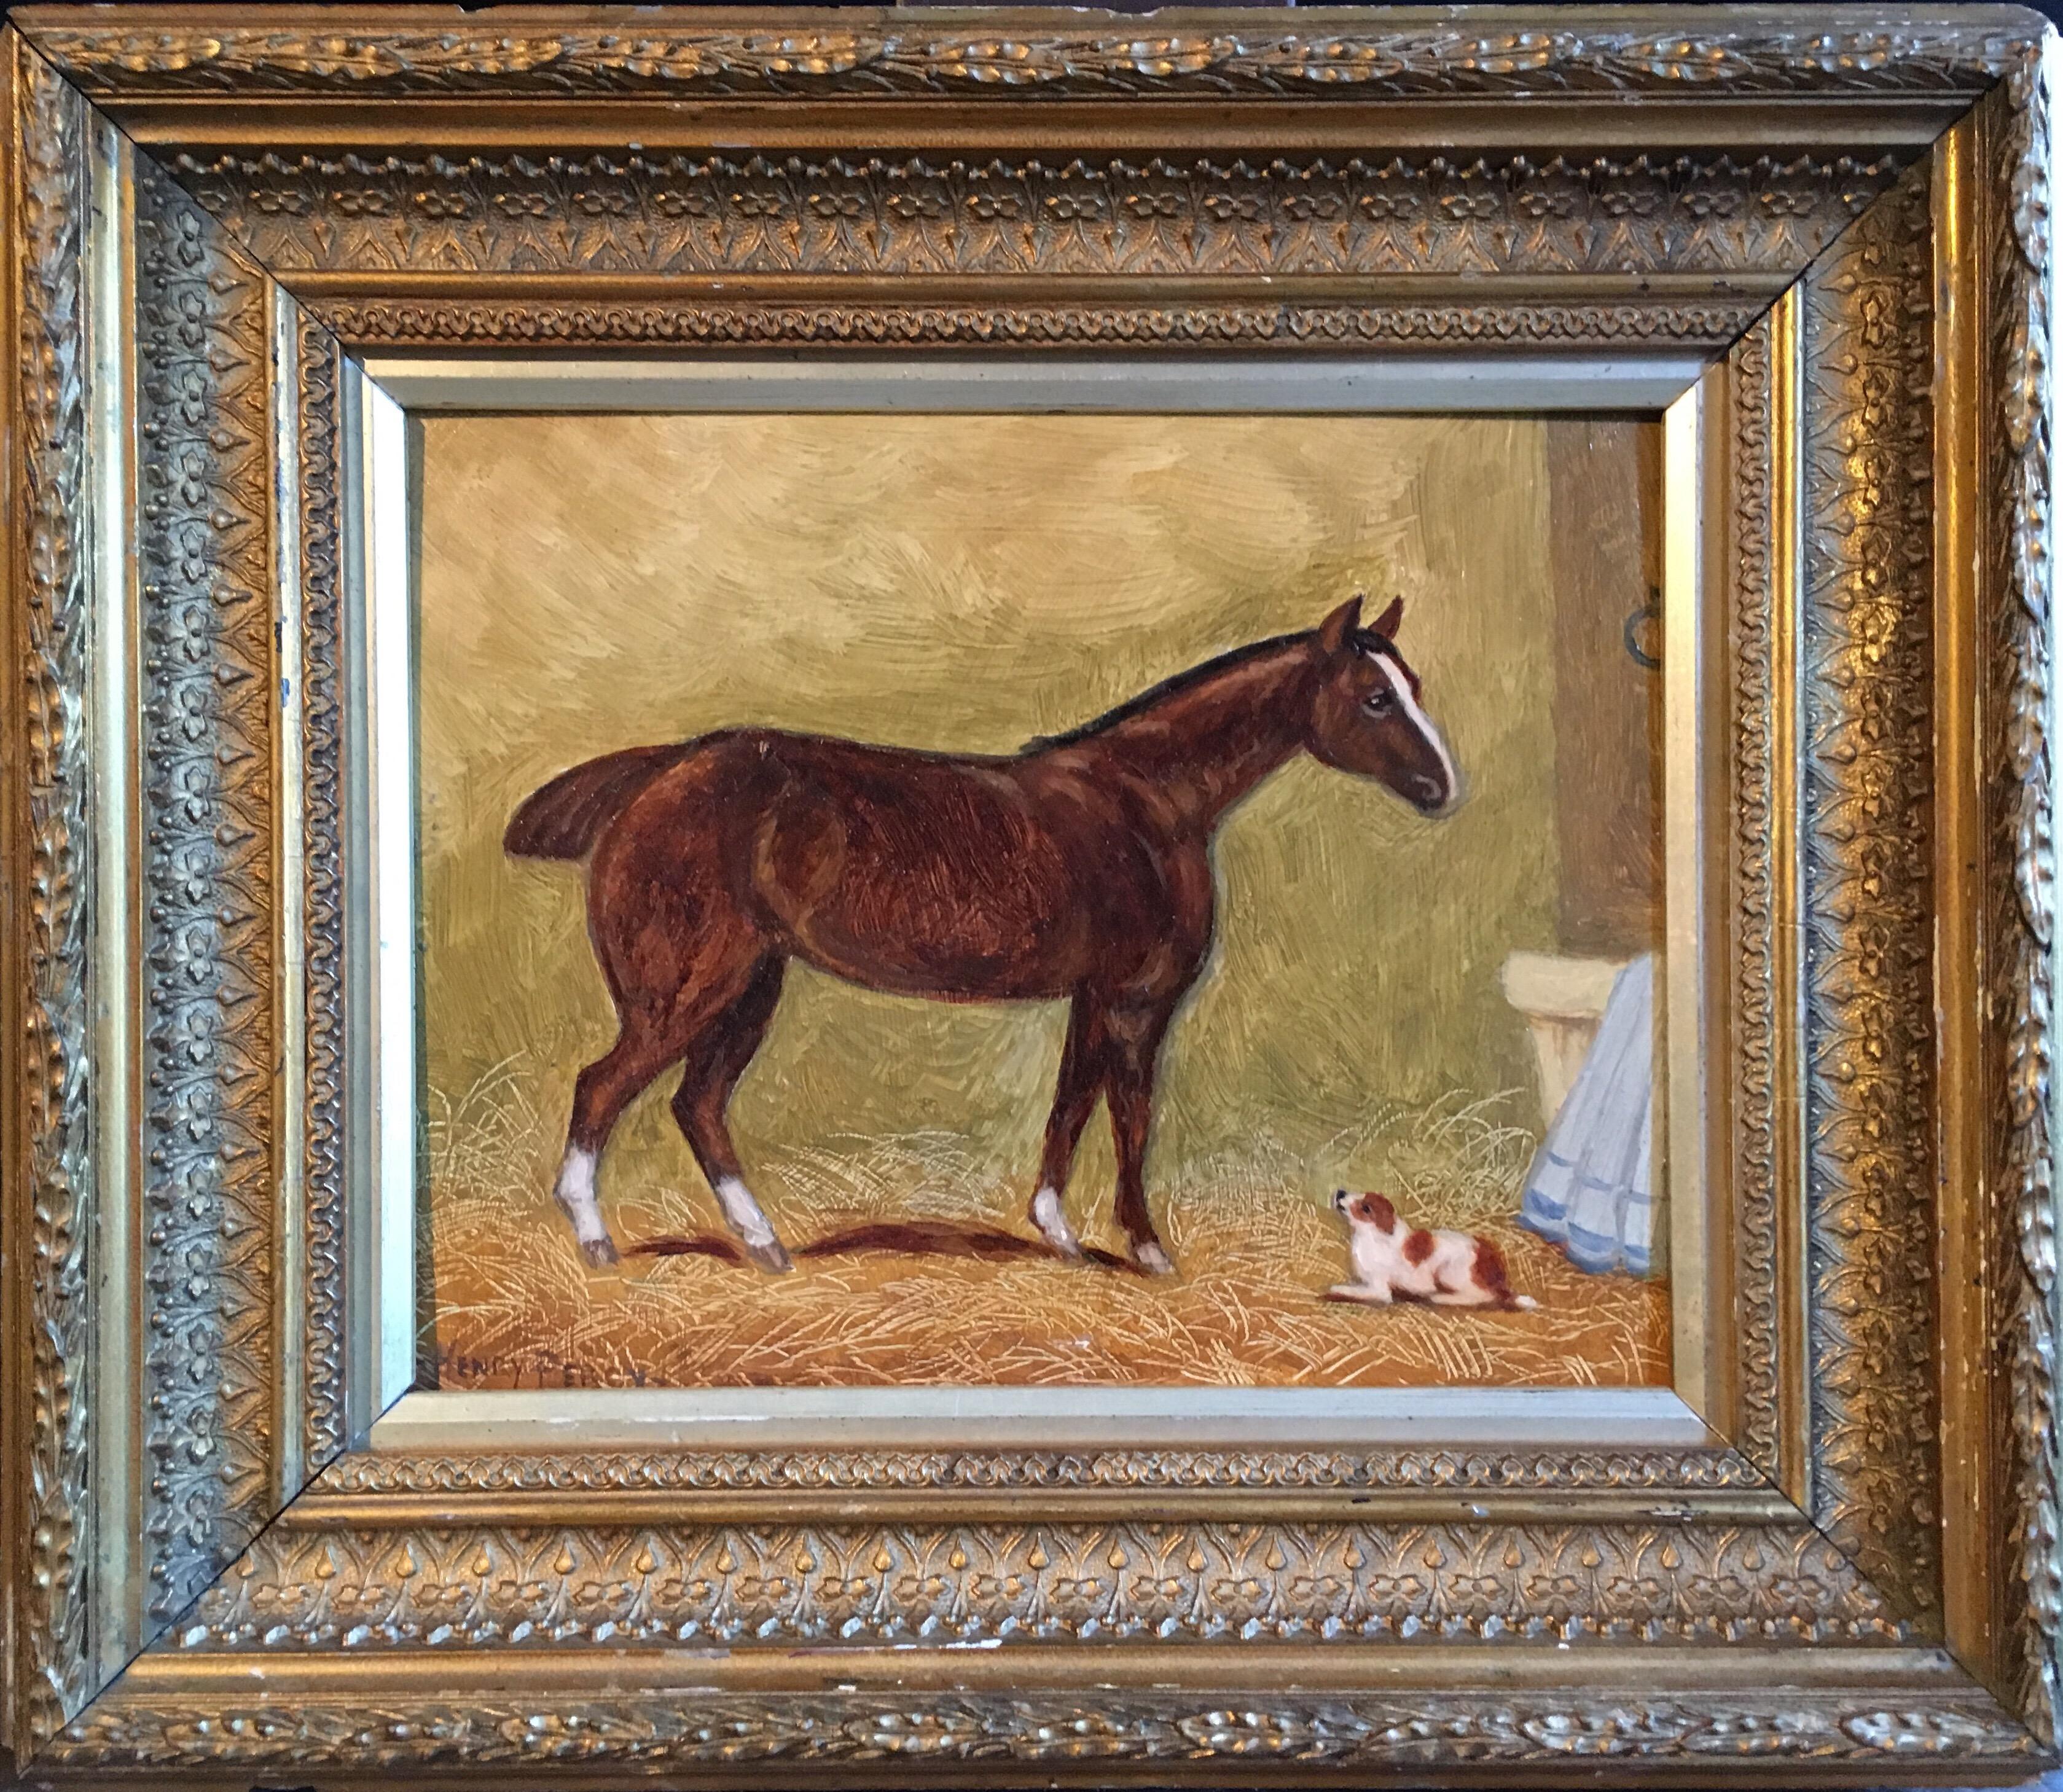 Henry Percy Figurative Painting - Horse & Dog, Antique English Oil Painting Signed and Framed